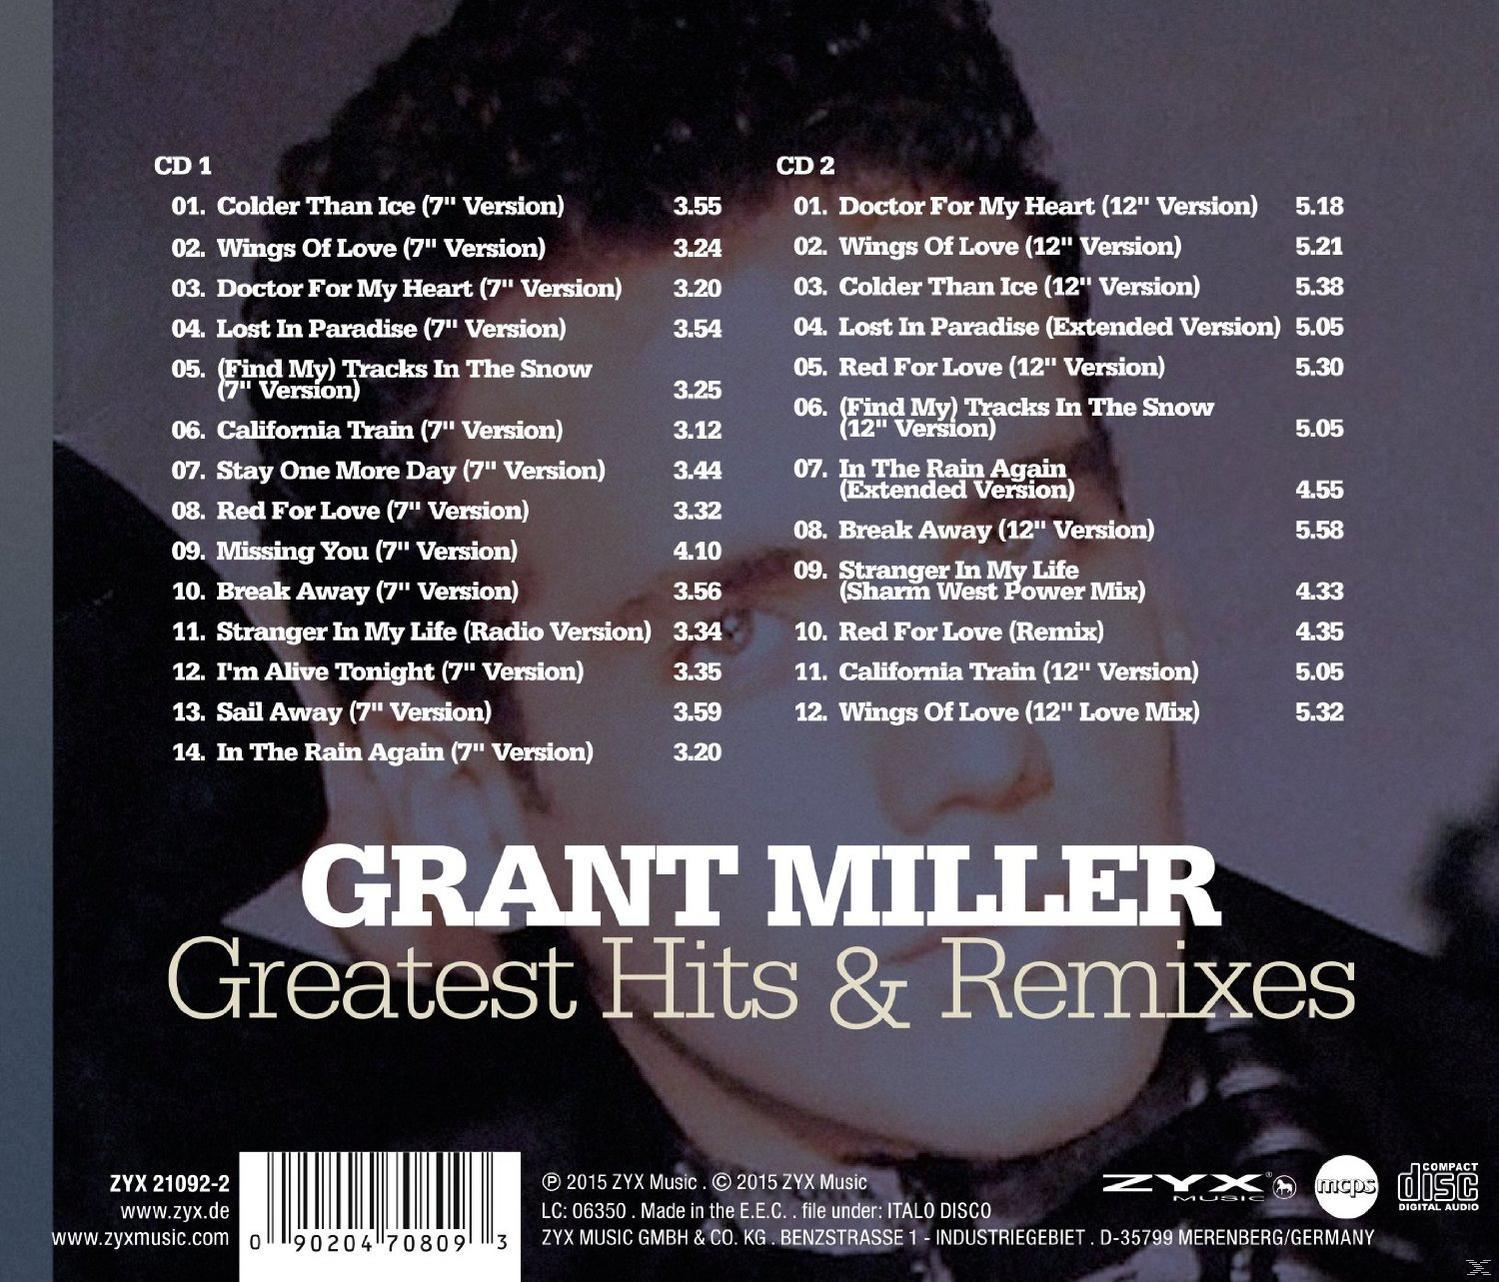 Hits Grant (CD) Greatest - - Miller & Remixes